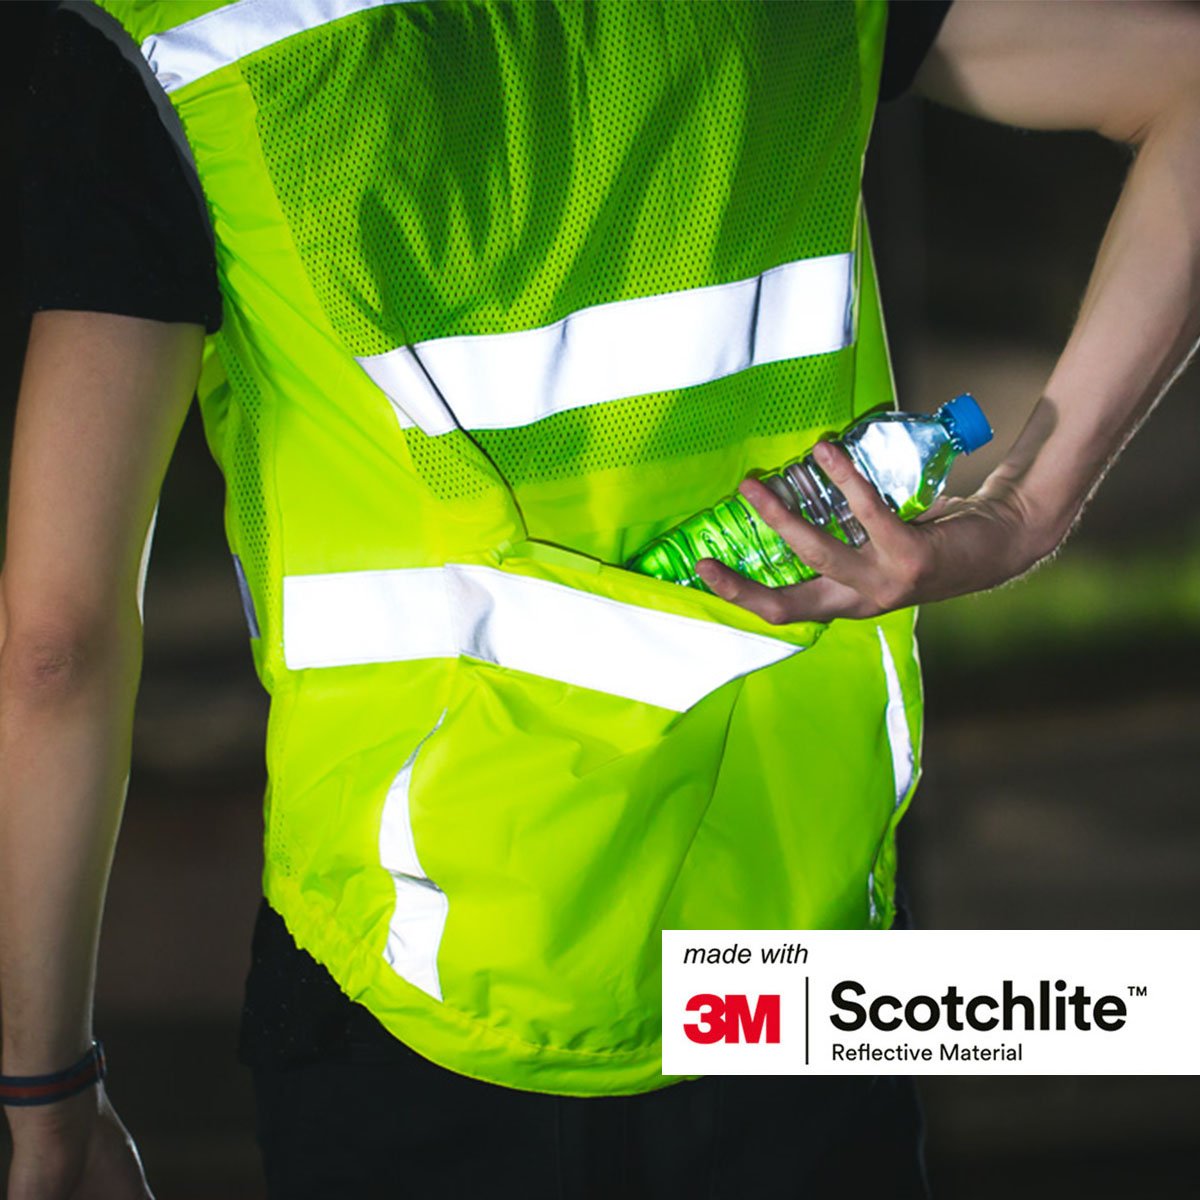 Man wearing Yellow reflective cycling vest, putting a bottle in the back pocket.